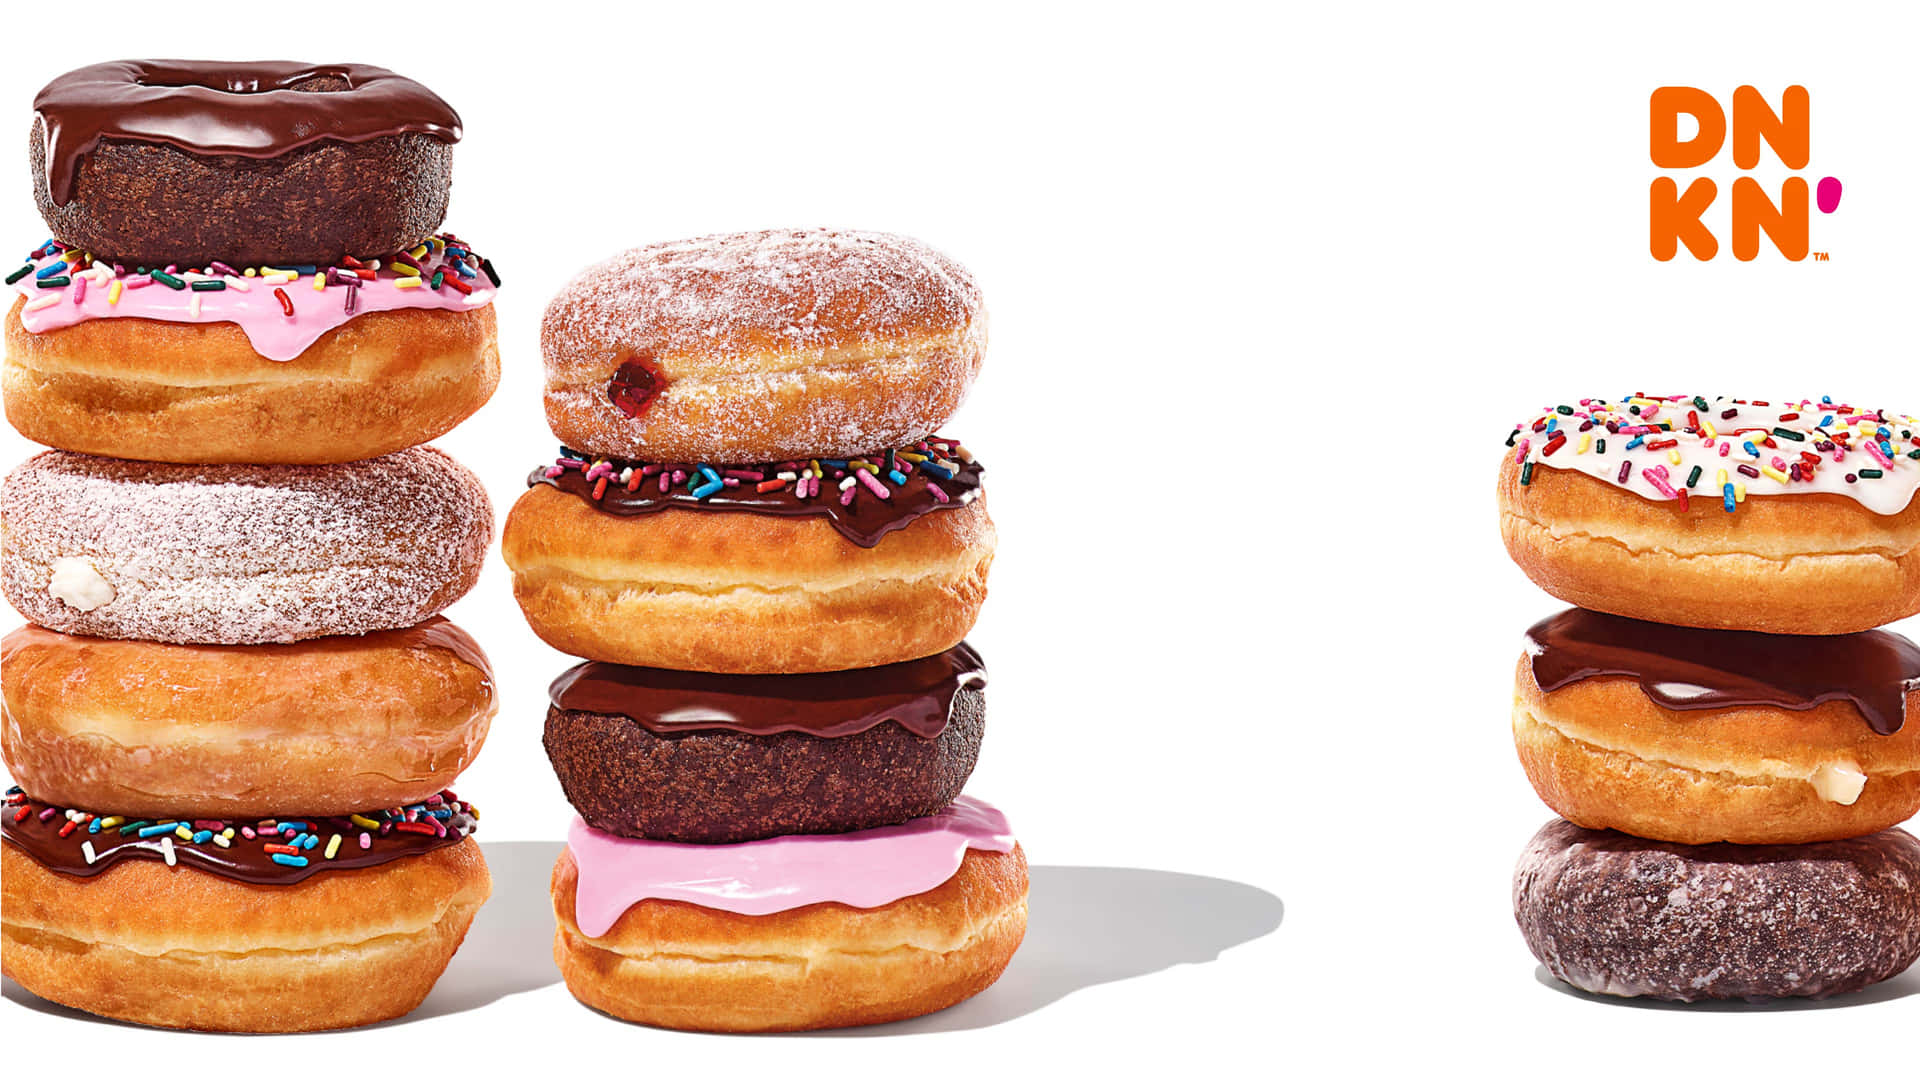 Delight your day with classic Dunkin Donuts